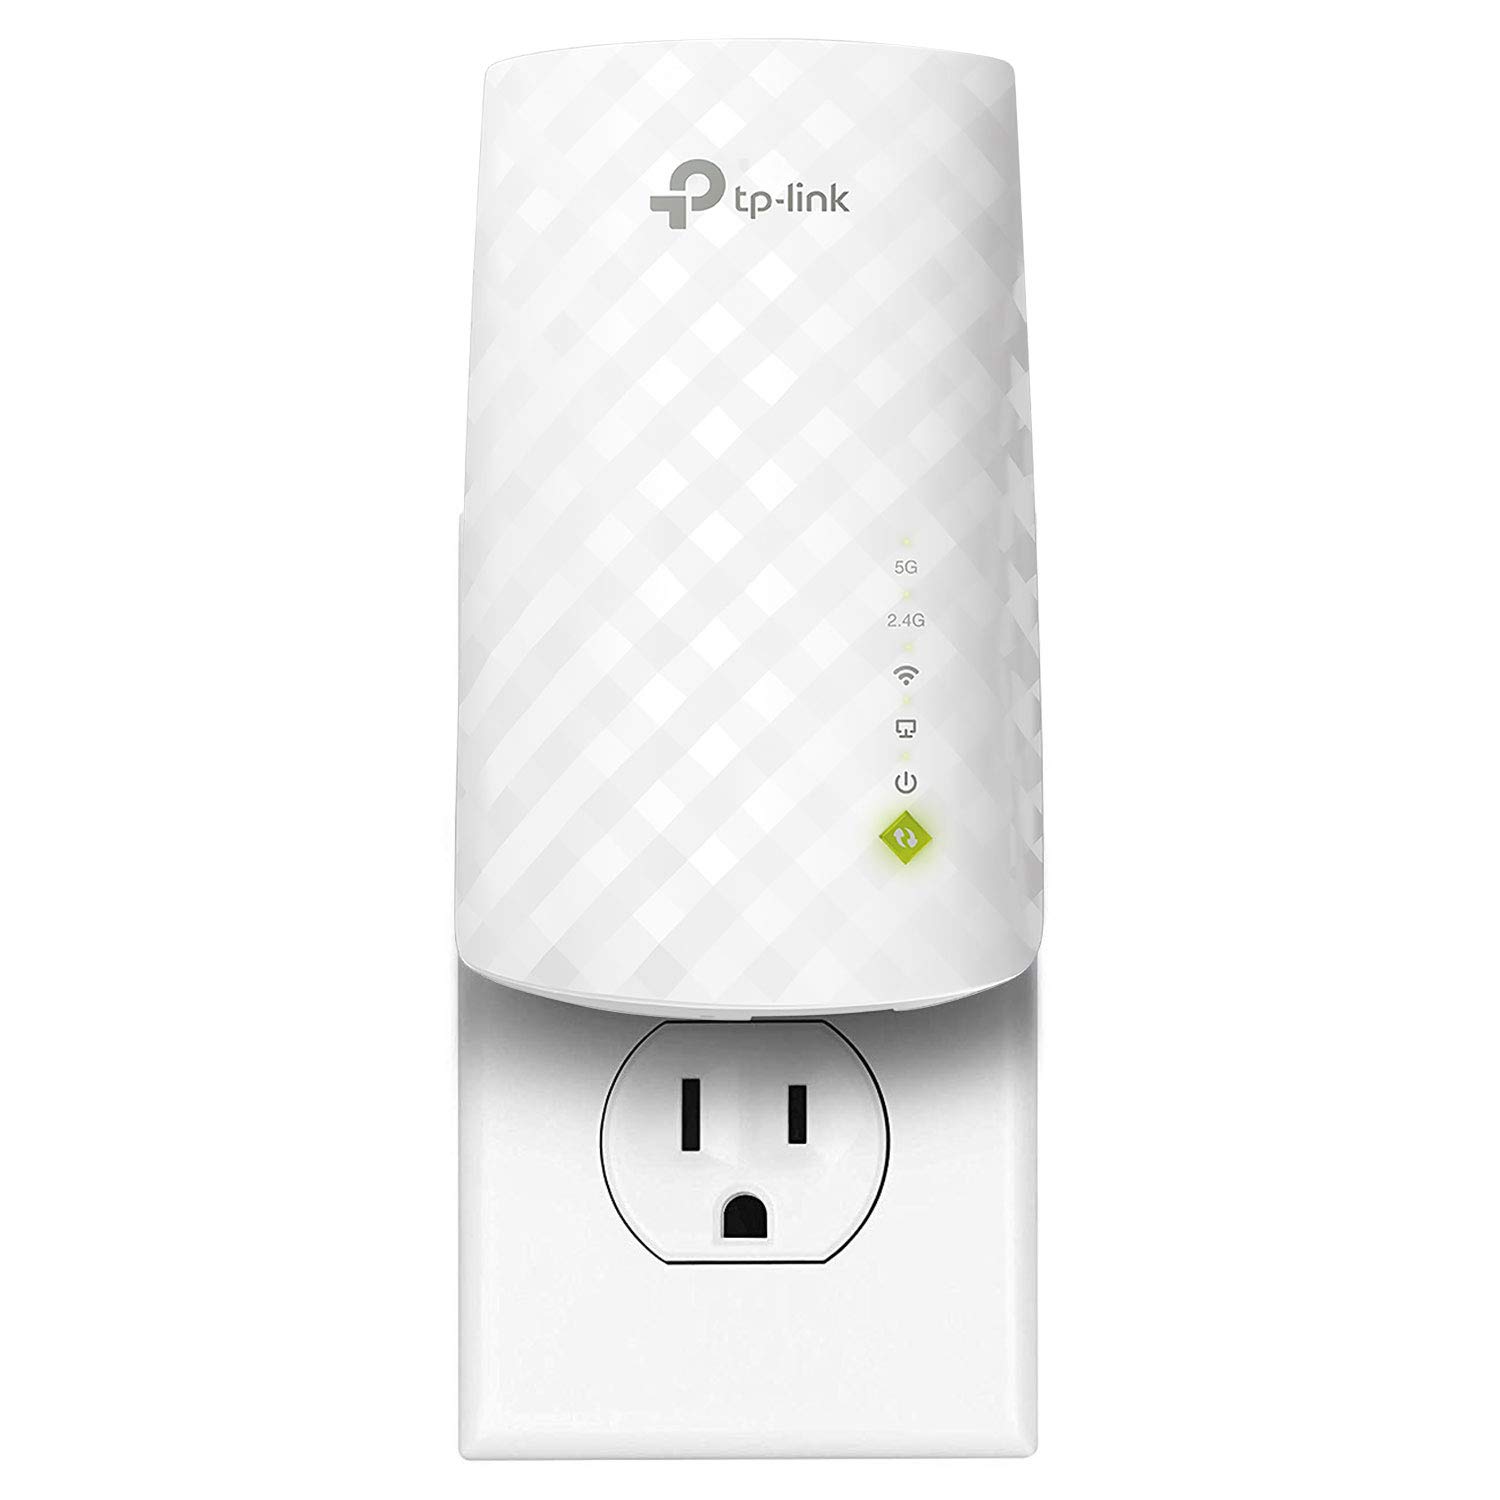 Today only: TP-Link AC750 dual band Wi-Fi range extender for $23